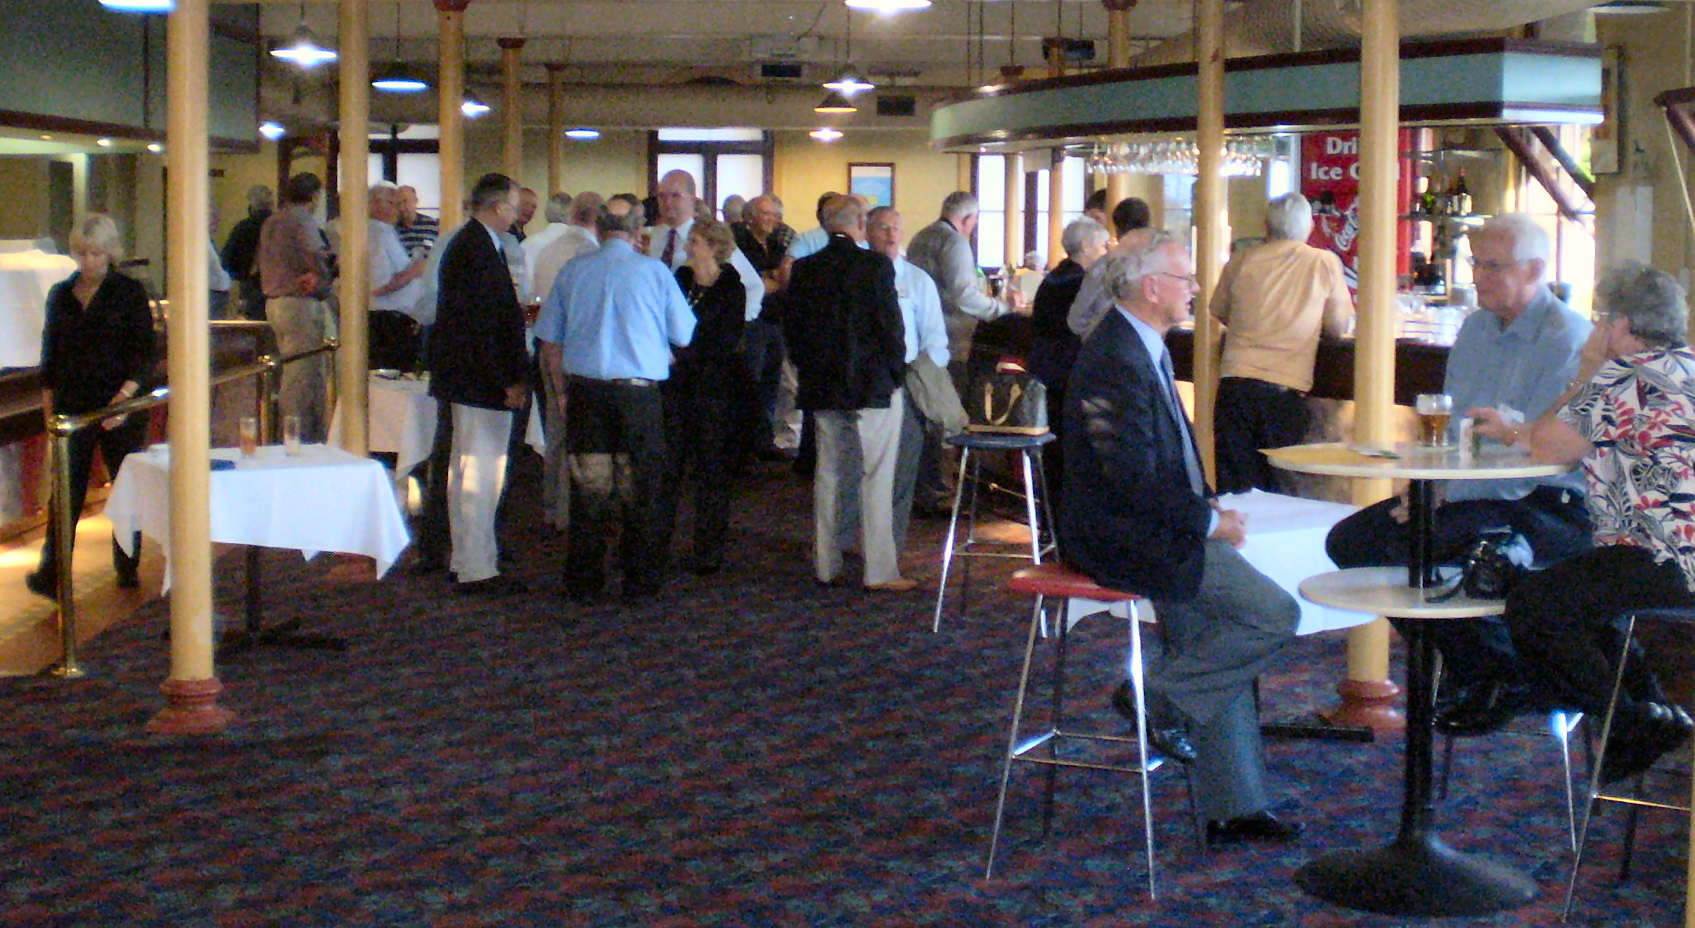 The social room at the Qld PS Club